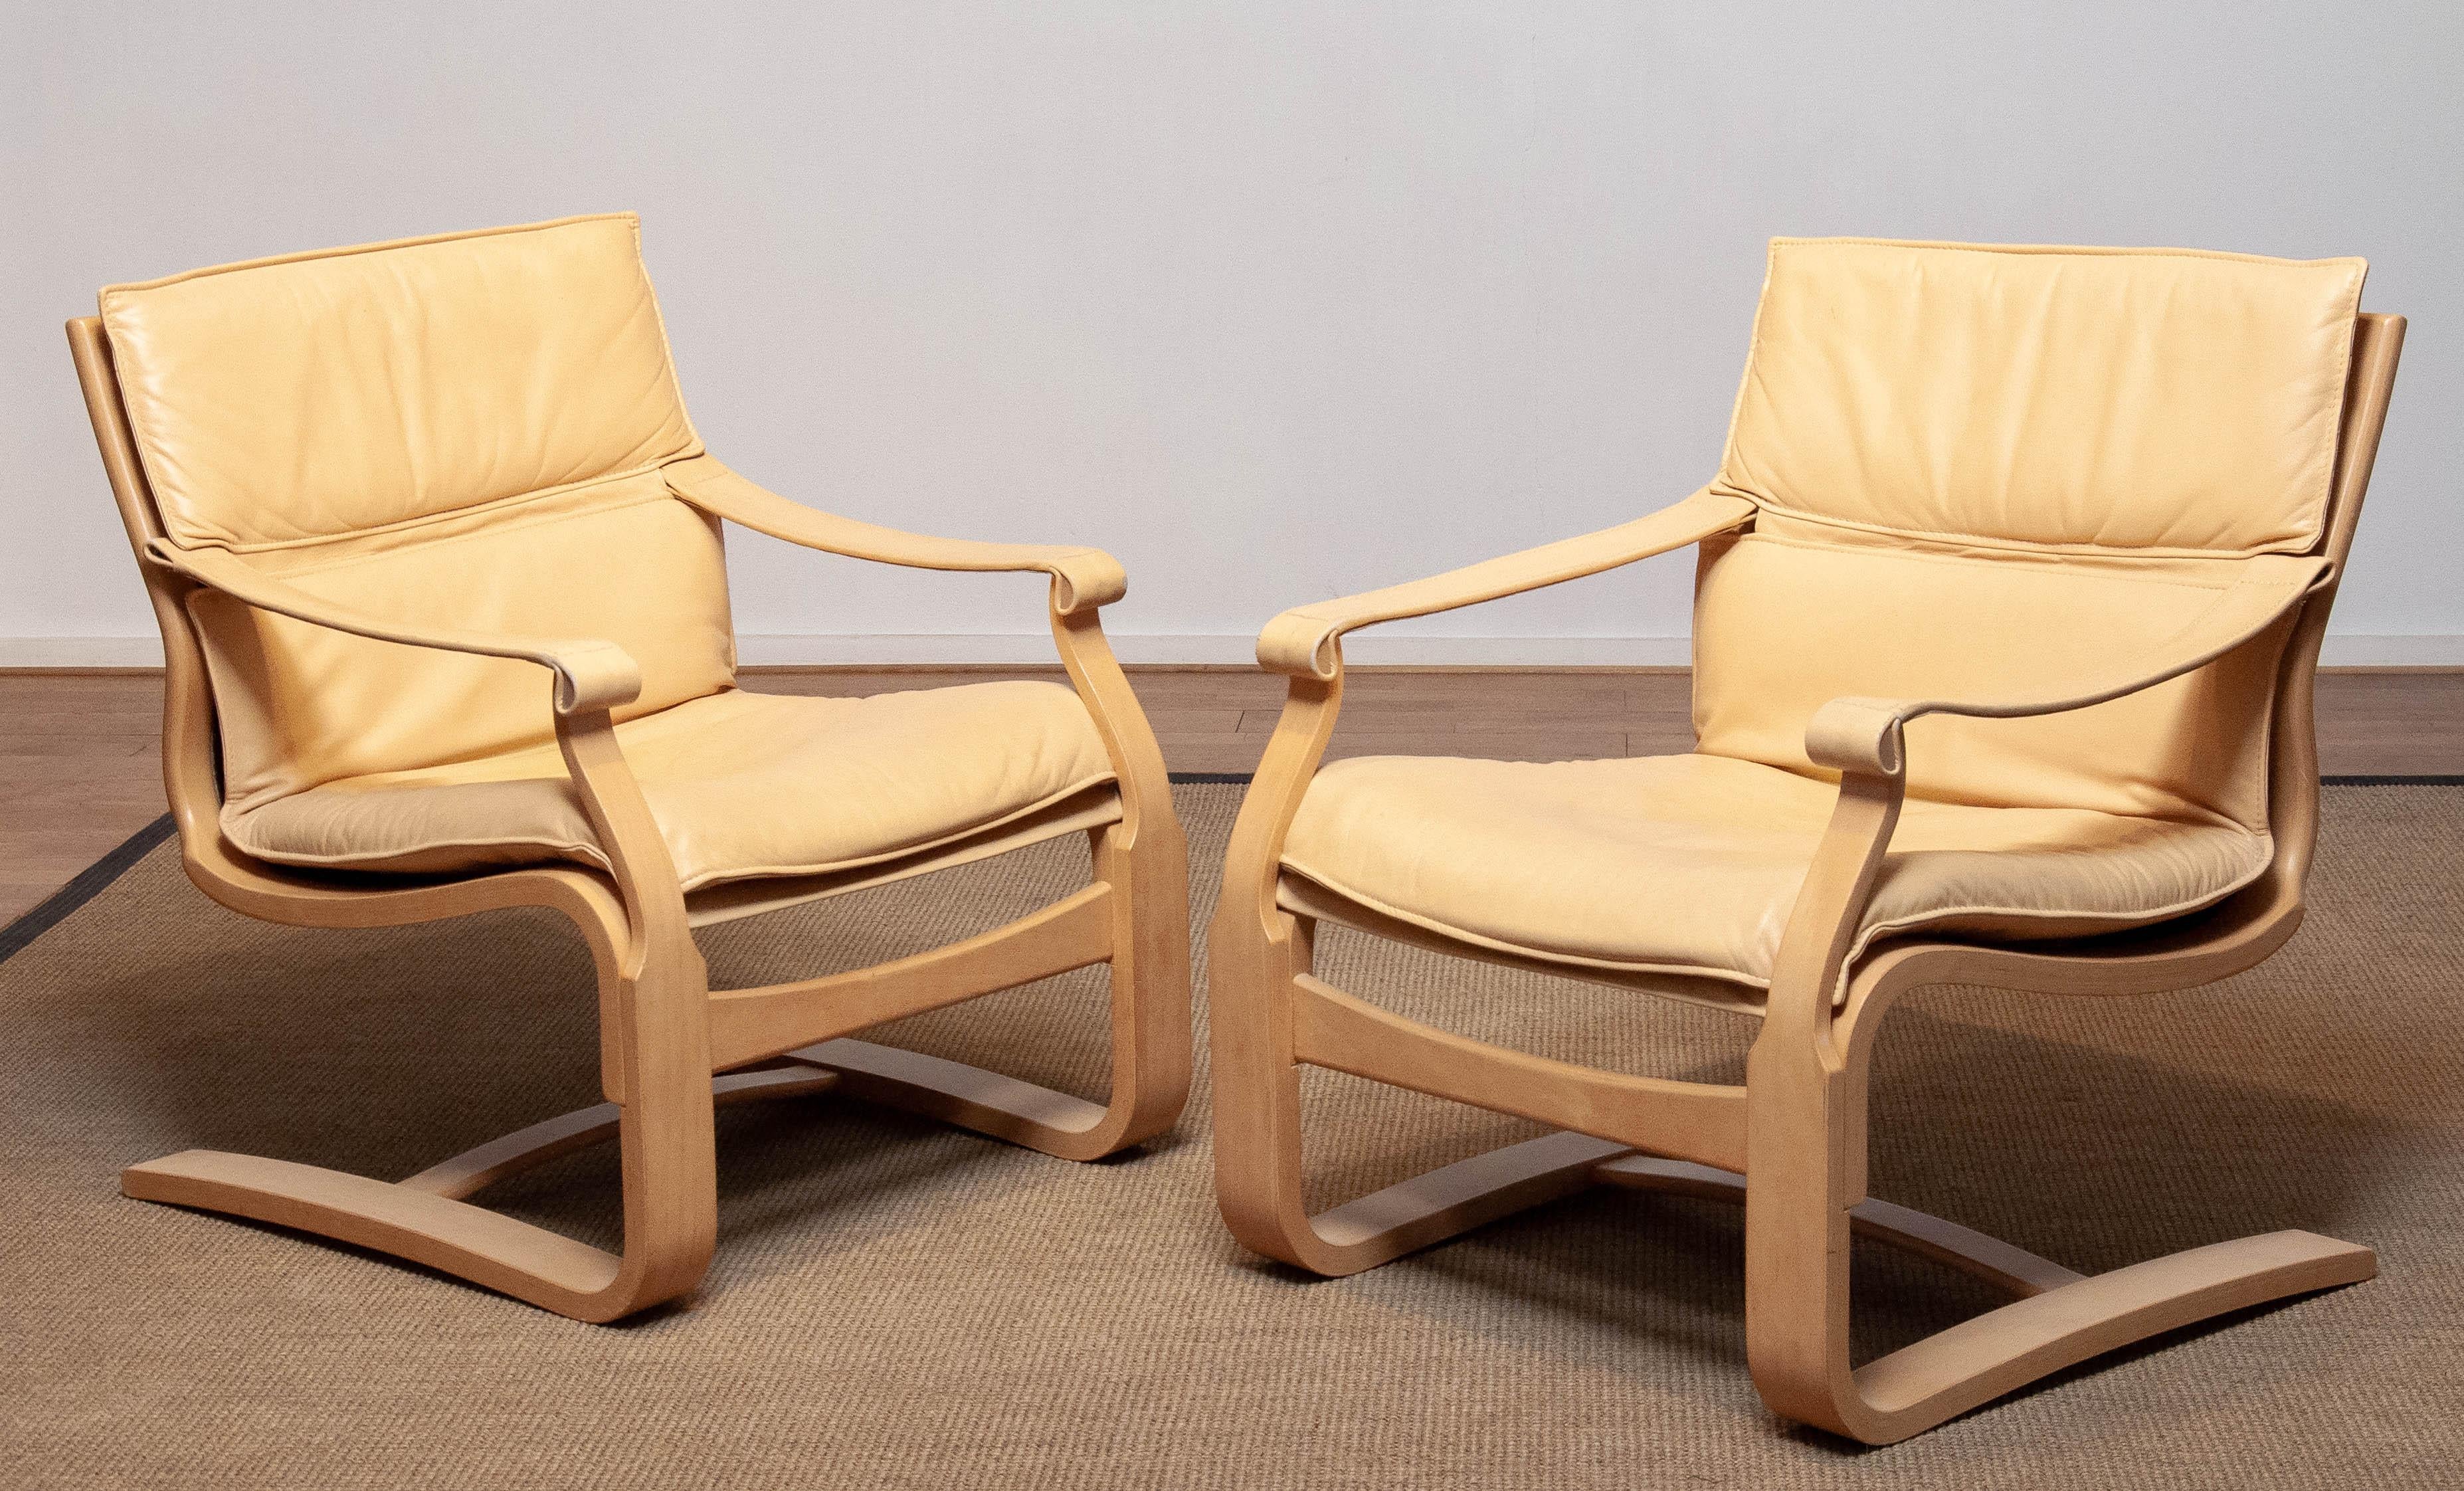 Set of two Scandinavian Modern beech bentwood lounge chairs designed by Ake Fribytter and manufactured by Nelo in Sweden in the 1970's. Both are upholstered with beige / creme leather and in allover good and very comfortable condition.
 